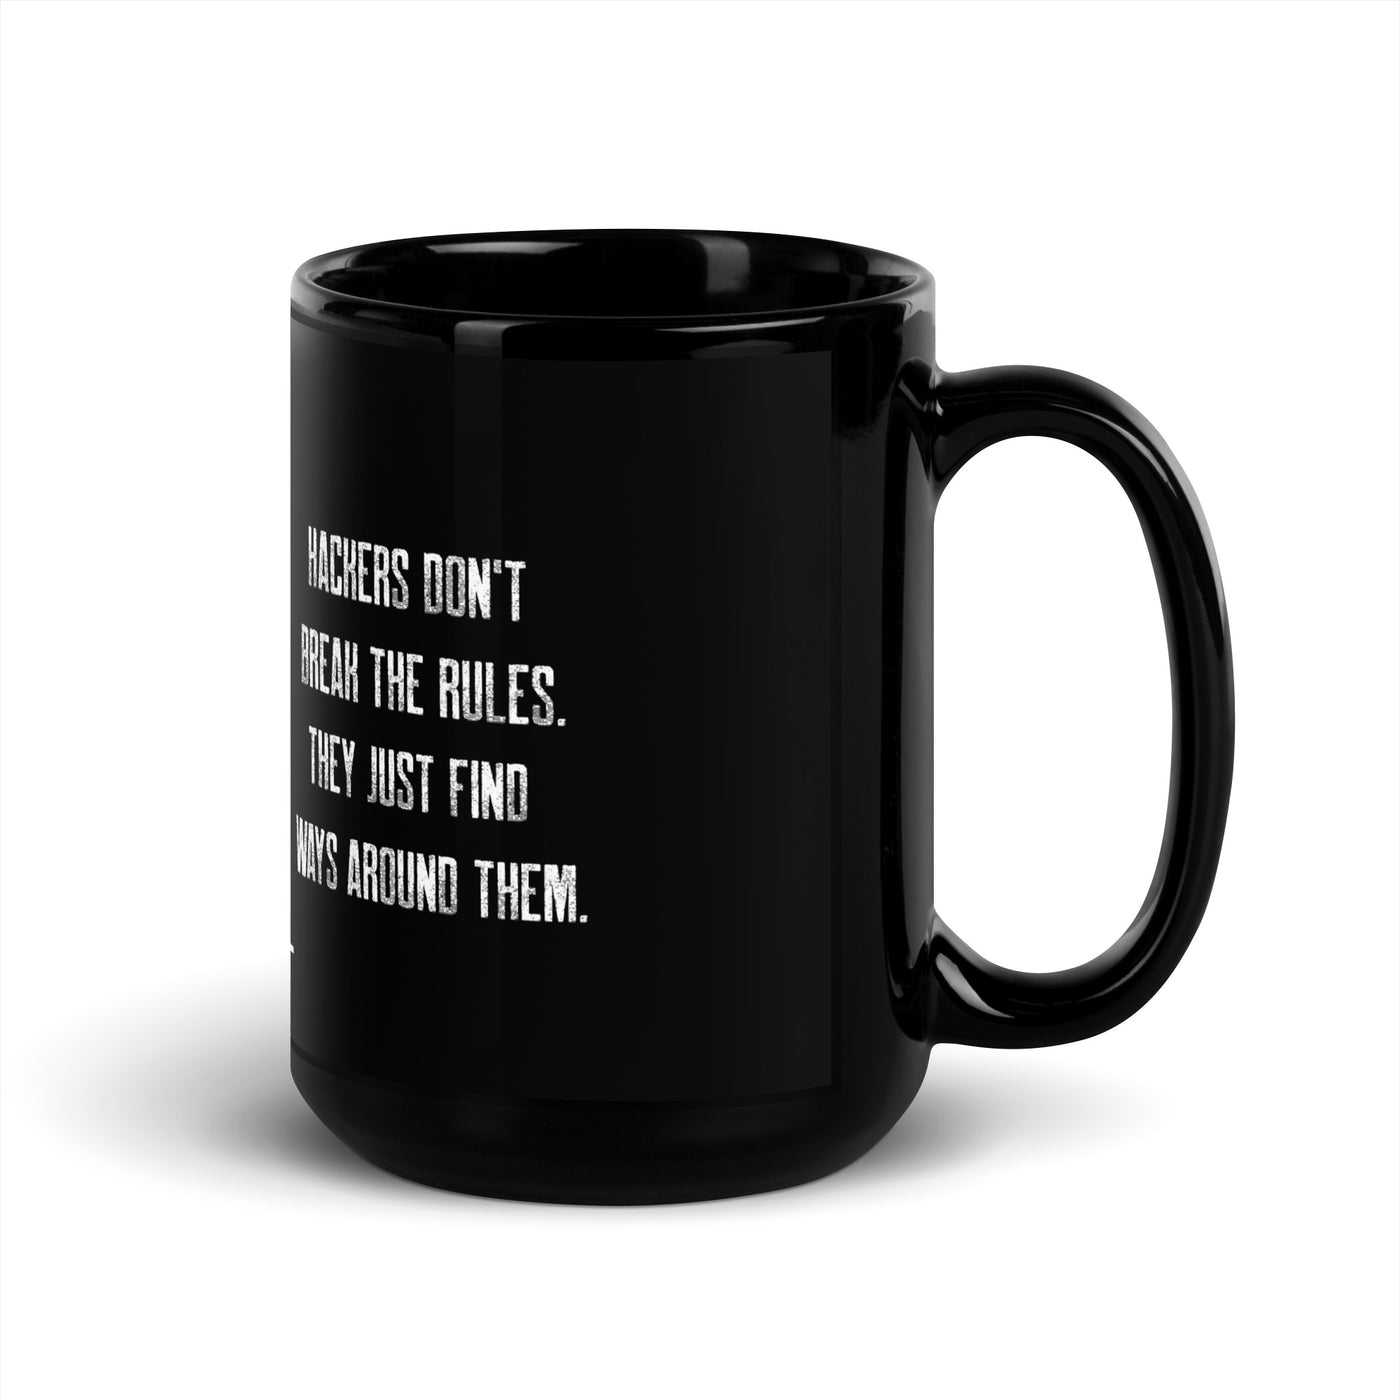 Hackers don't break the rules, they just find ways around them V1 - Black Glossy Mug